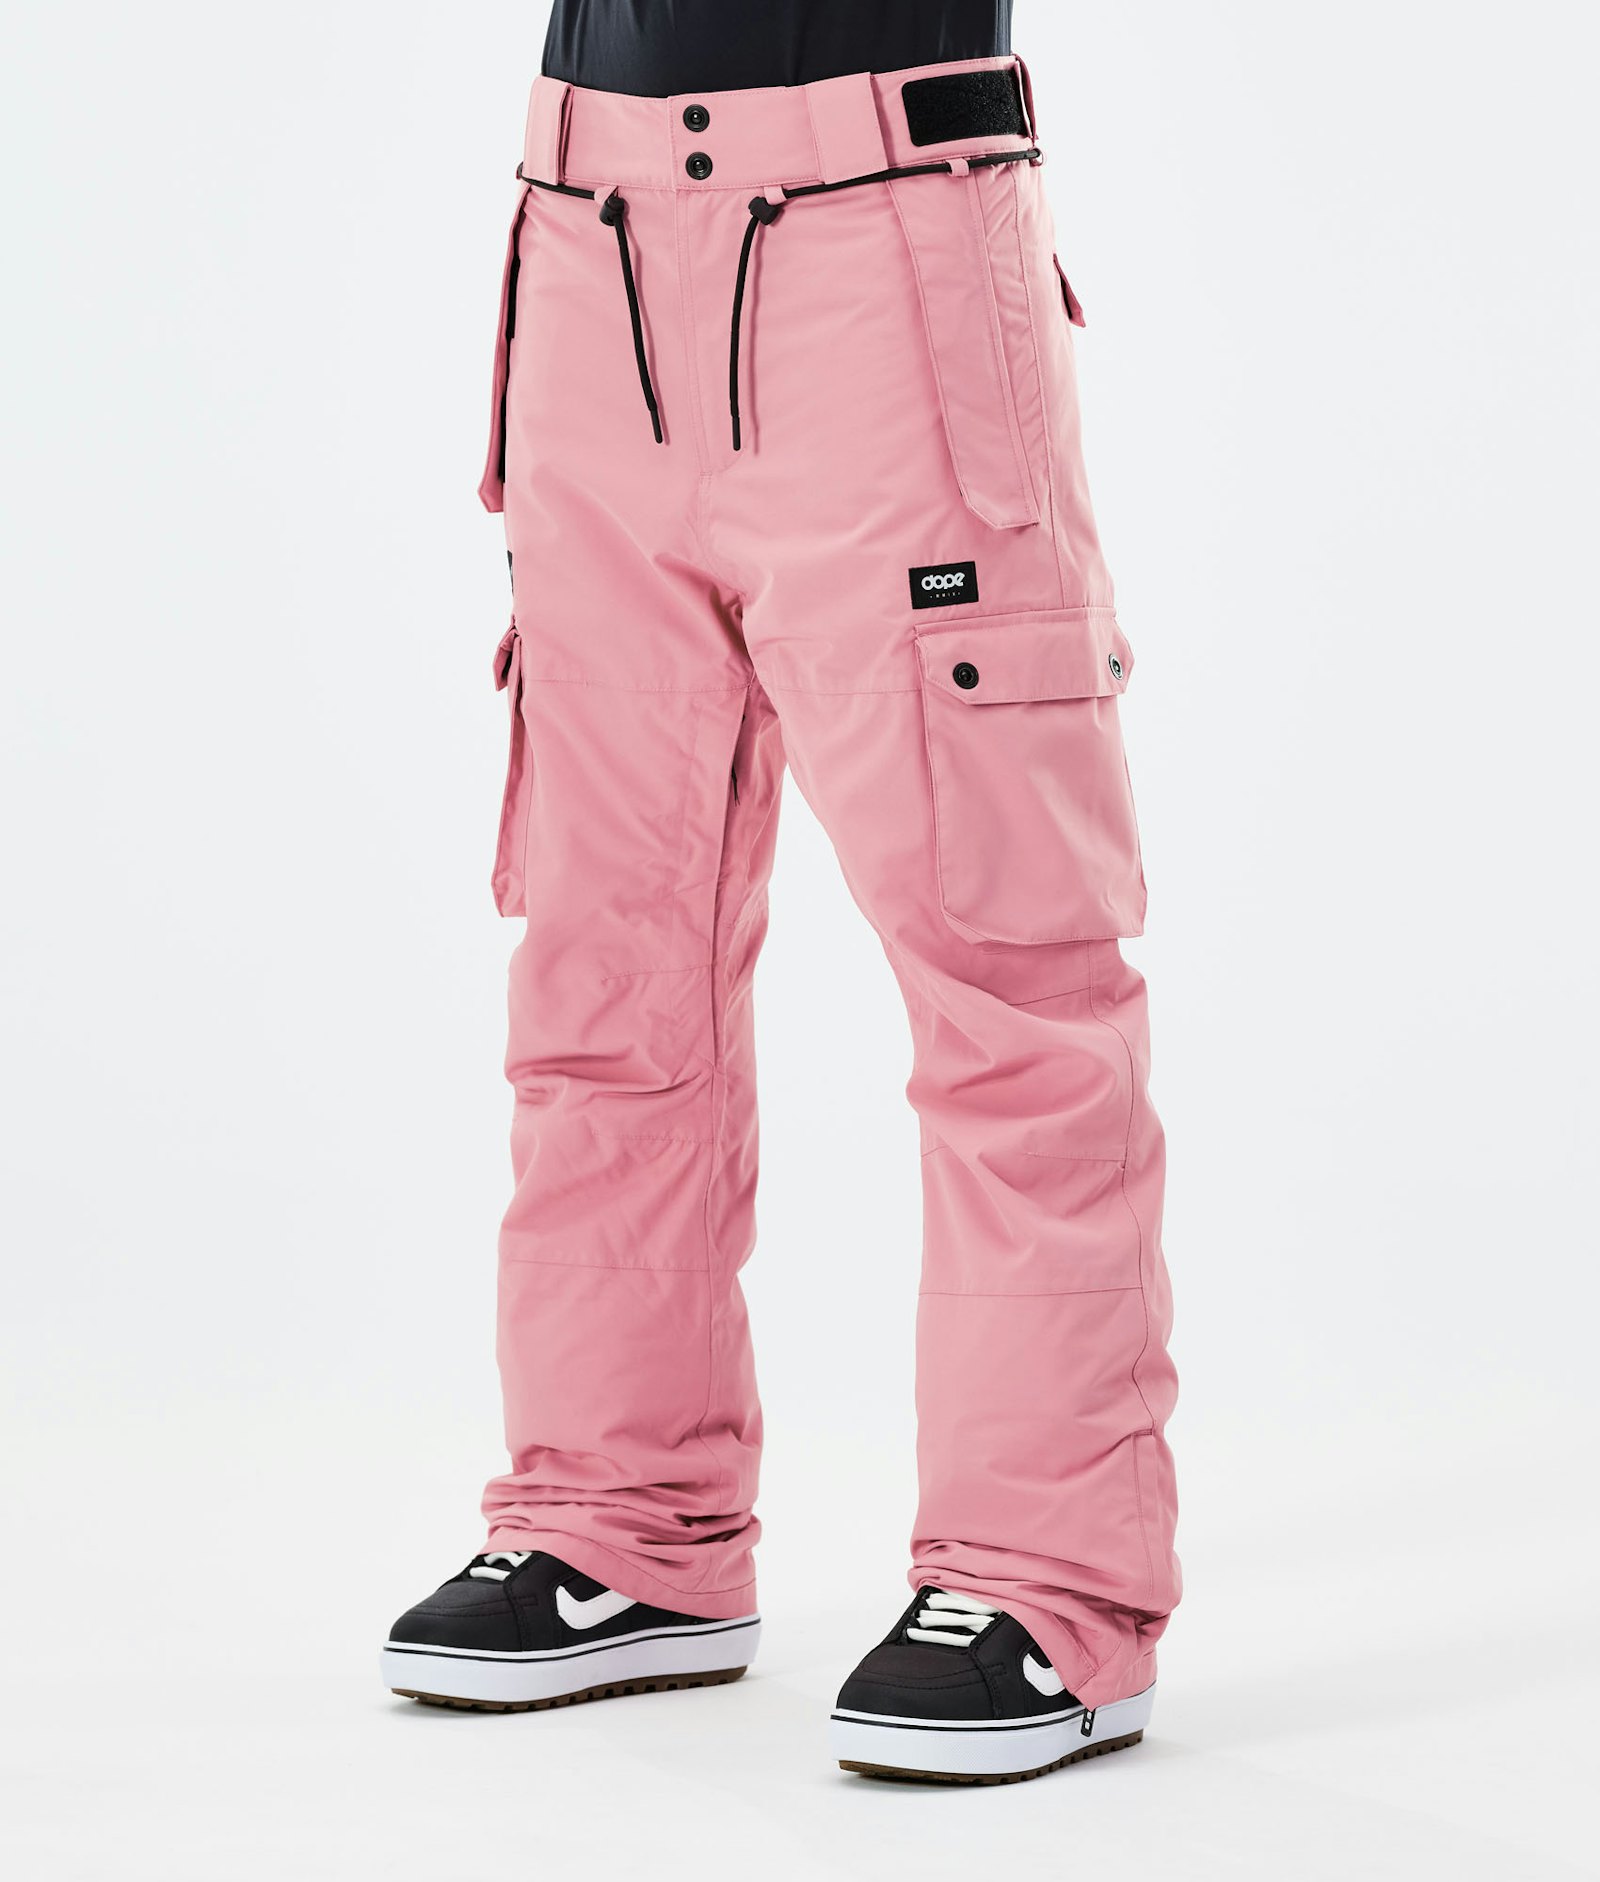 Dope Iconic W 2021 Snowboard Pants Women Pink, Image 1 of 6